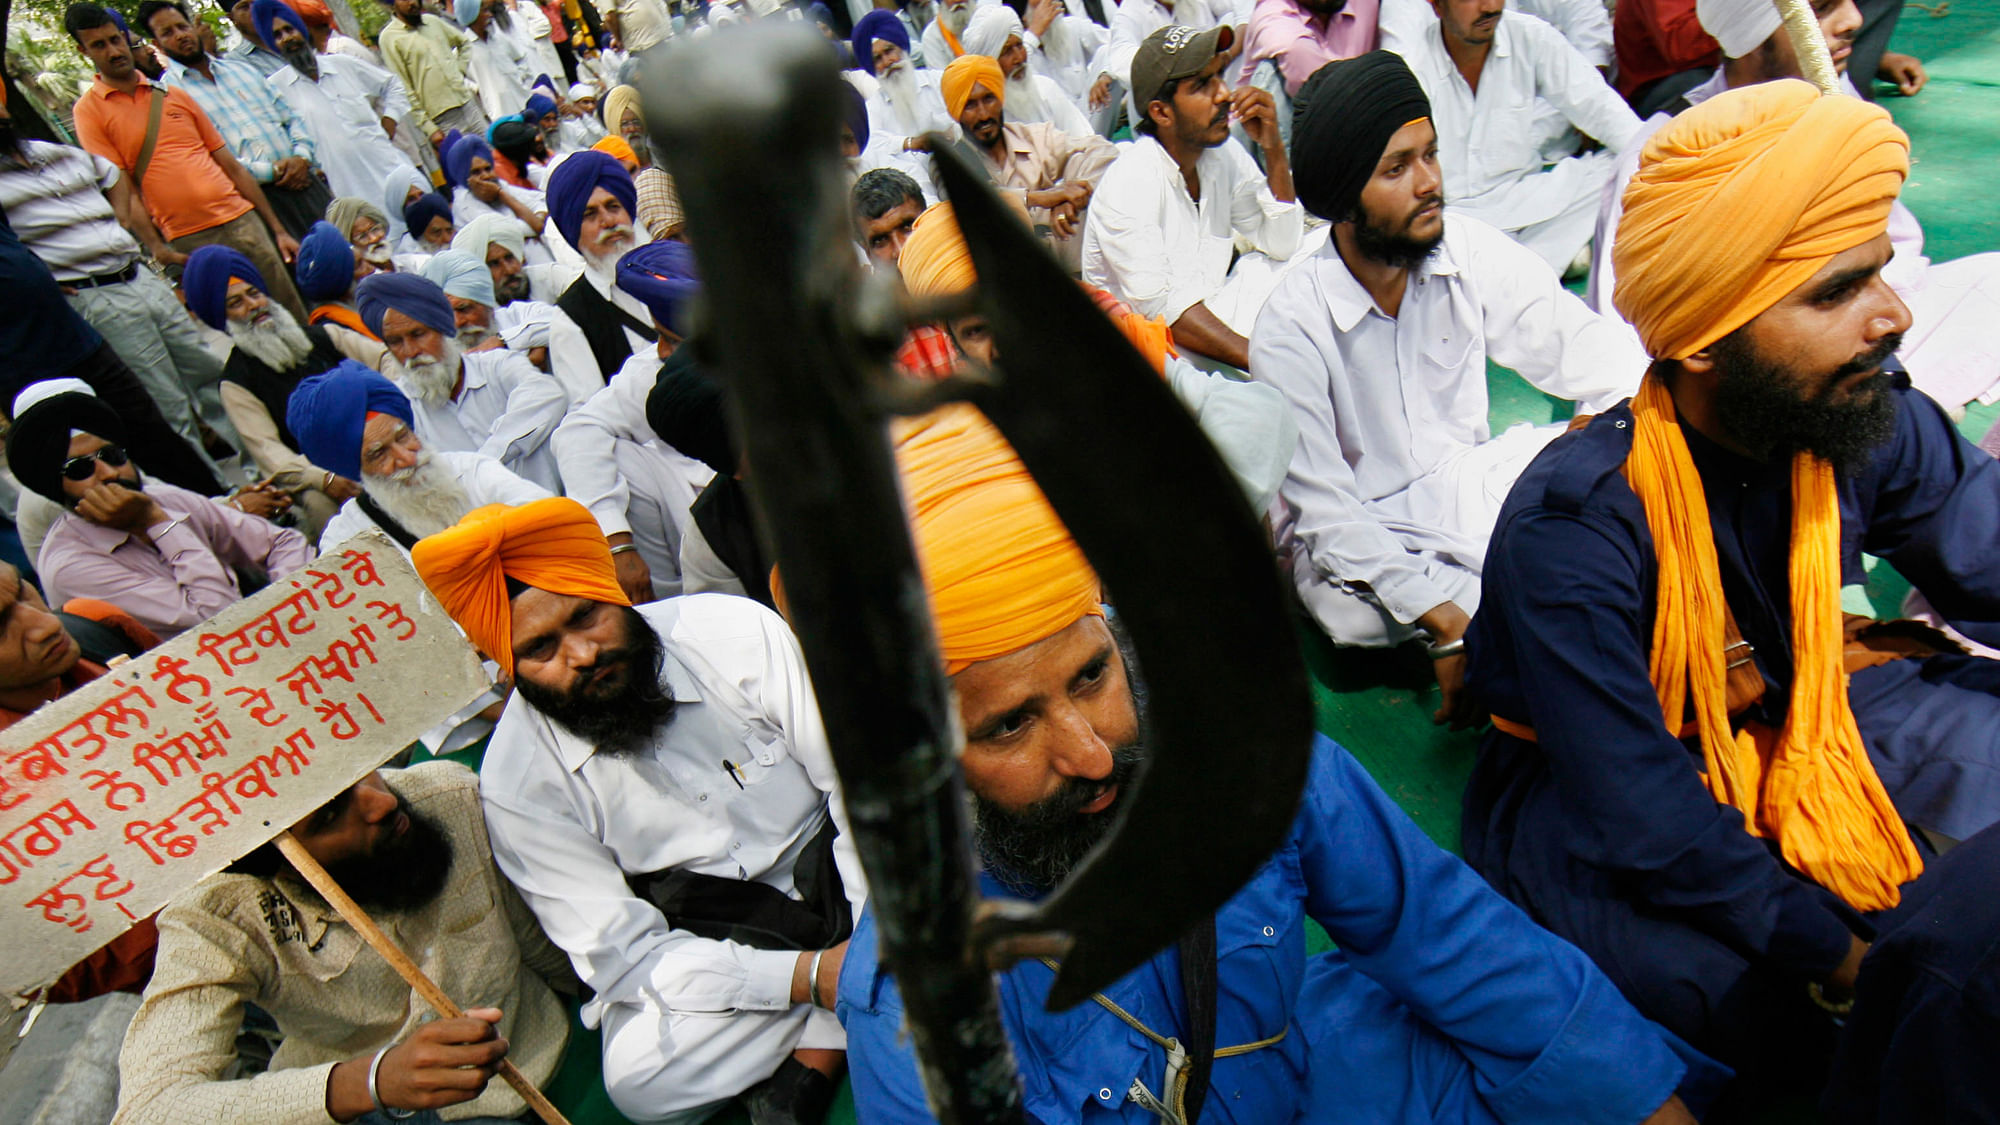 The 1984 riots led to the killing of nearly 3,000 Sikh men, women and children.